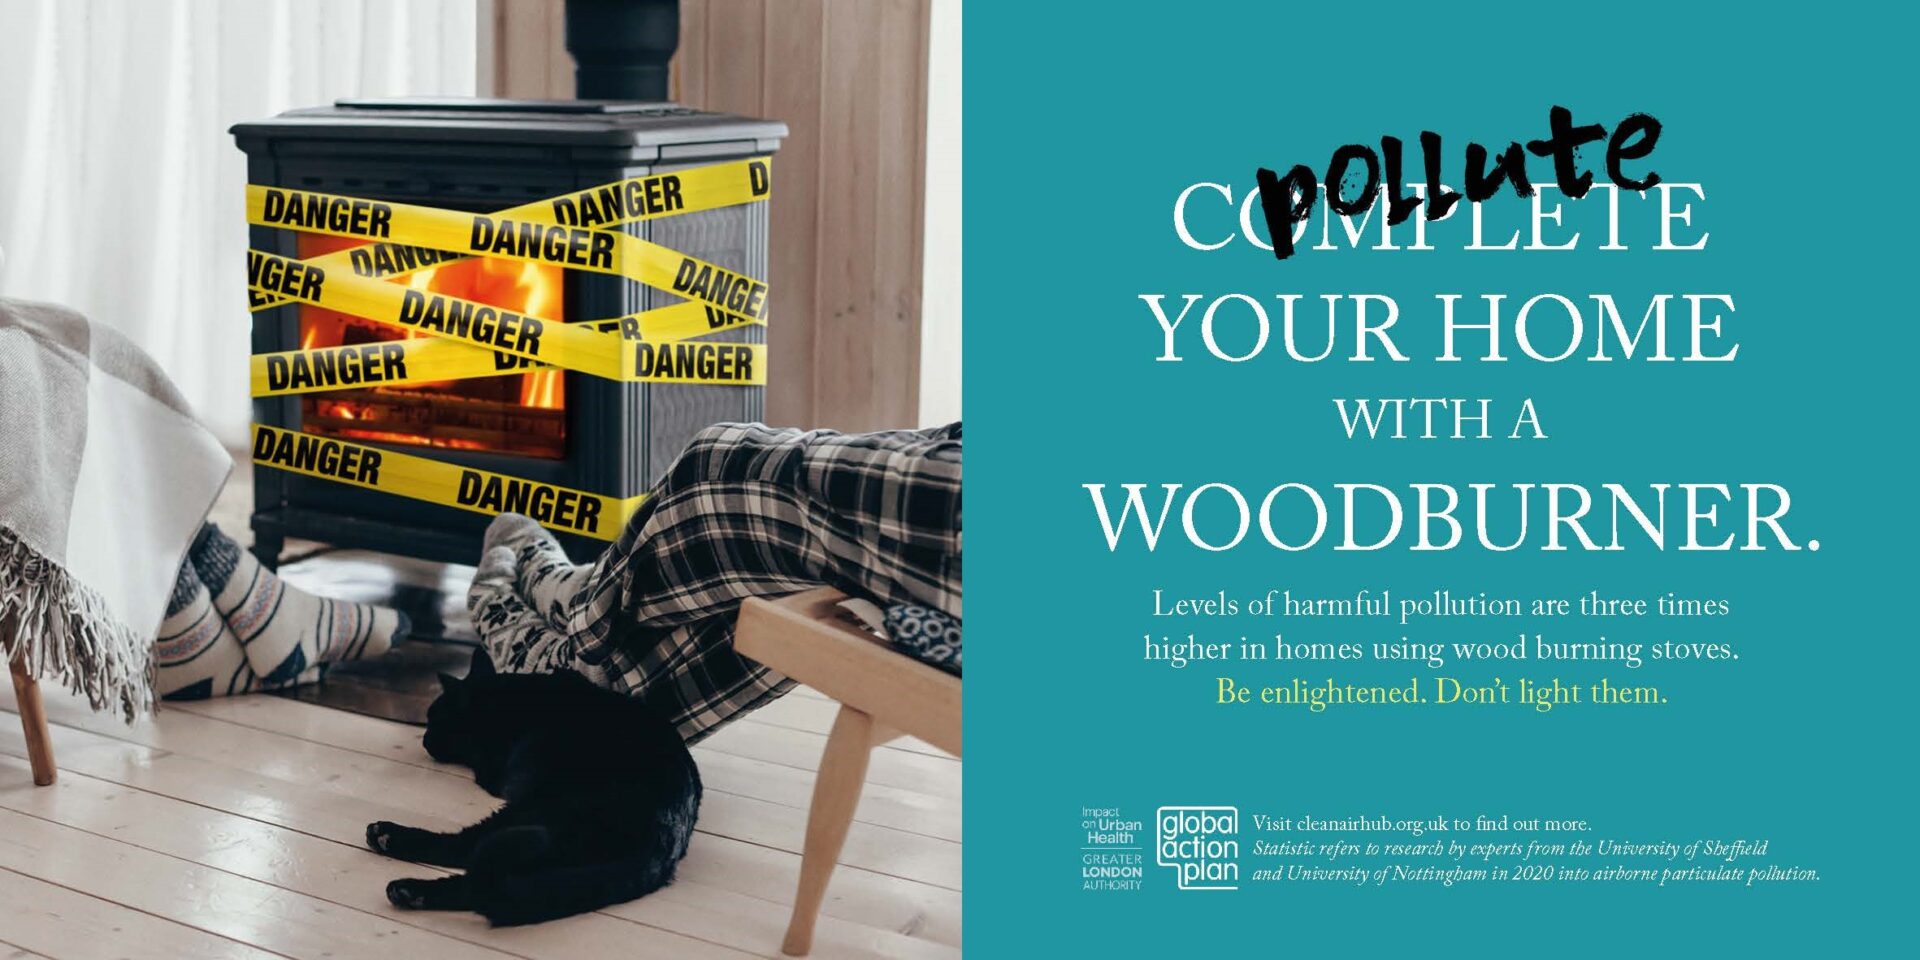 Image shows a fake ad with a wood burning stove that is wrapped in yellow 'Danger' tape. The ad contains text reading: Pollute your home with a wood burner. Levels of pollution are three times higher in homes using wood burning stoves. Be enlightened. Don't light them.